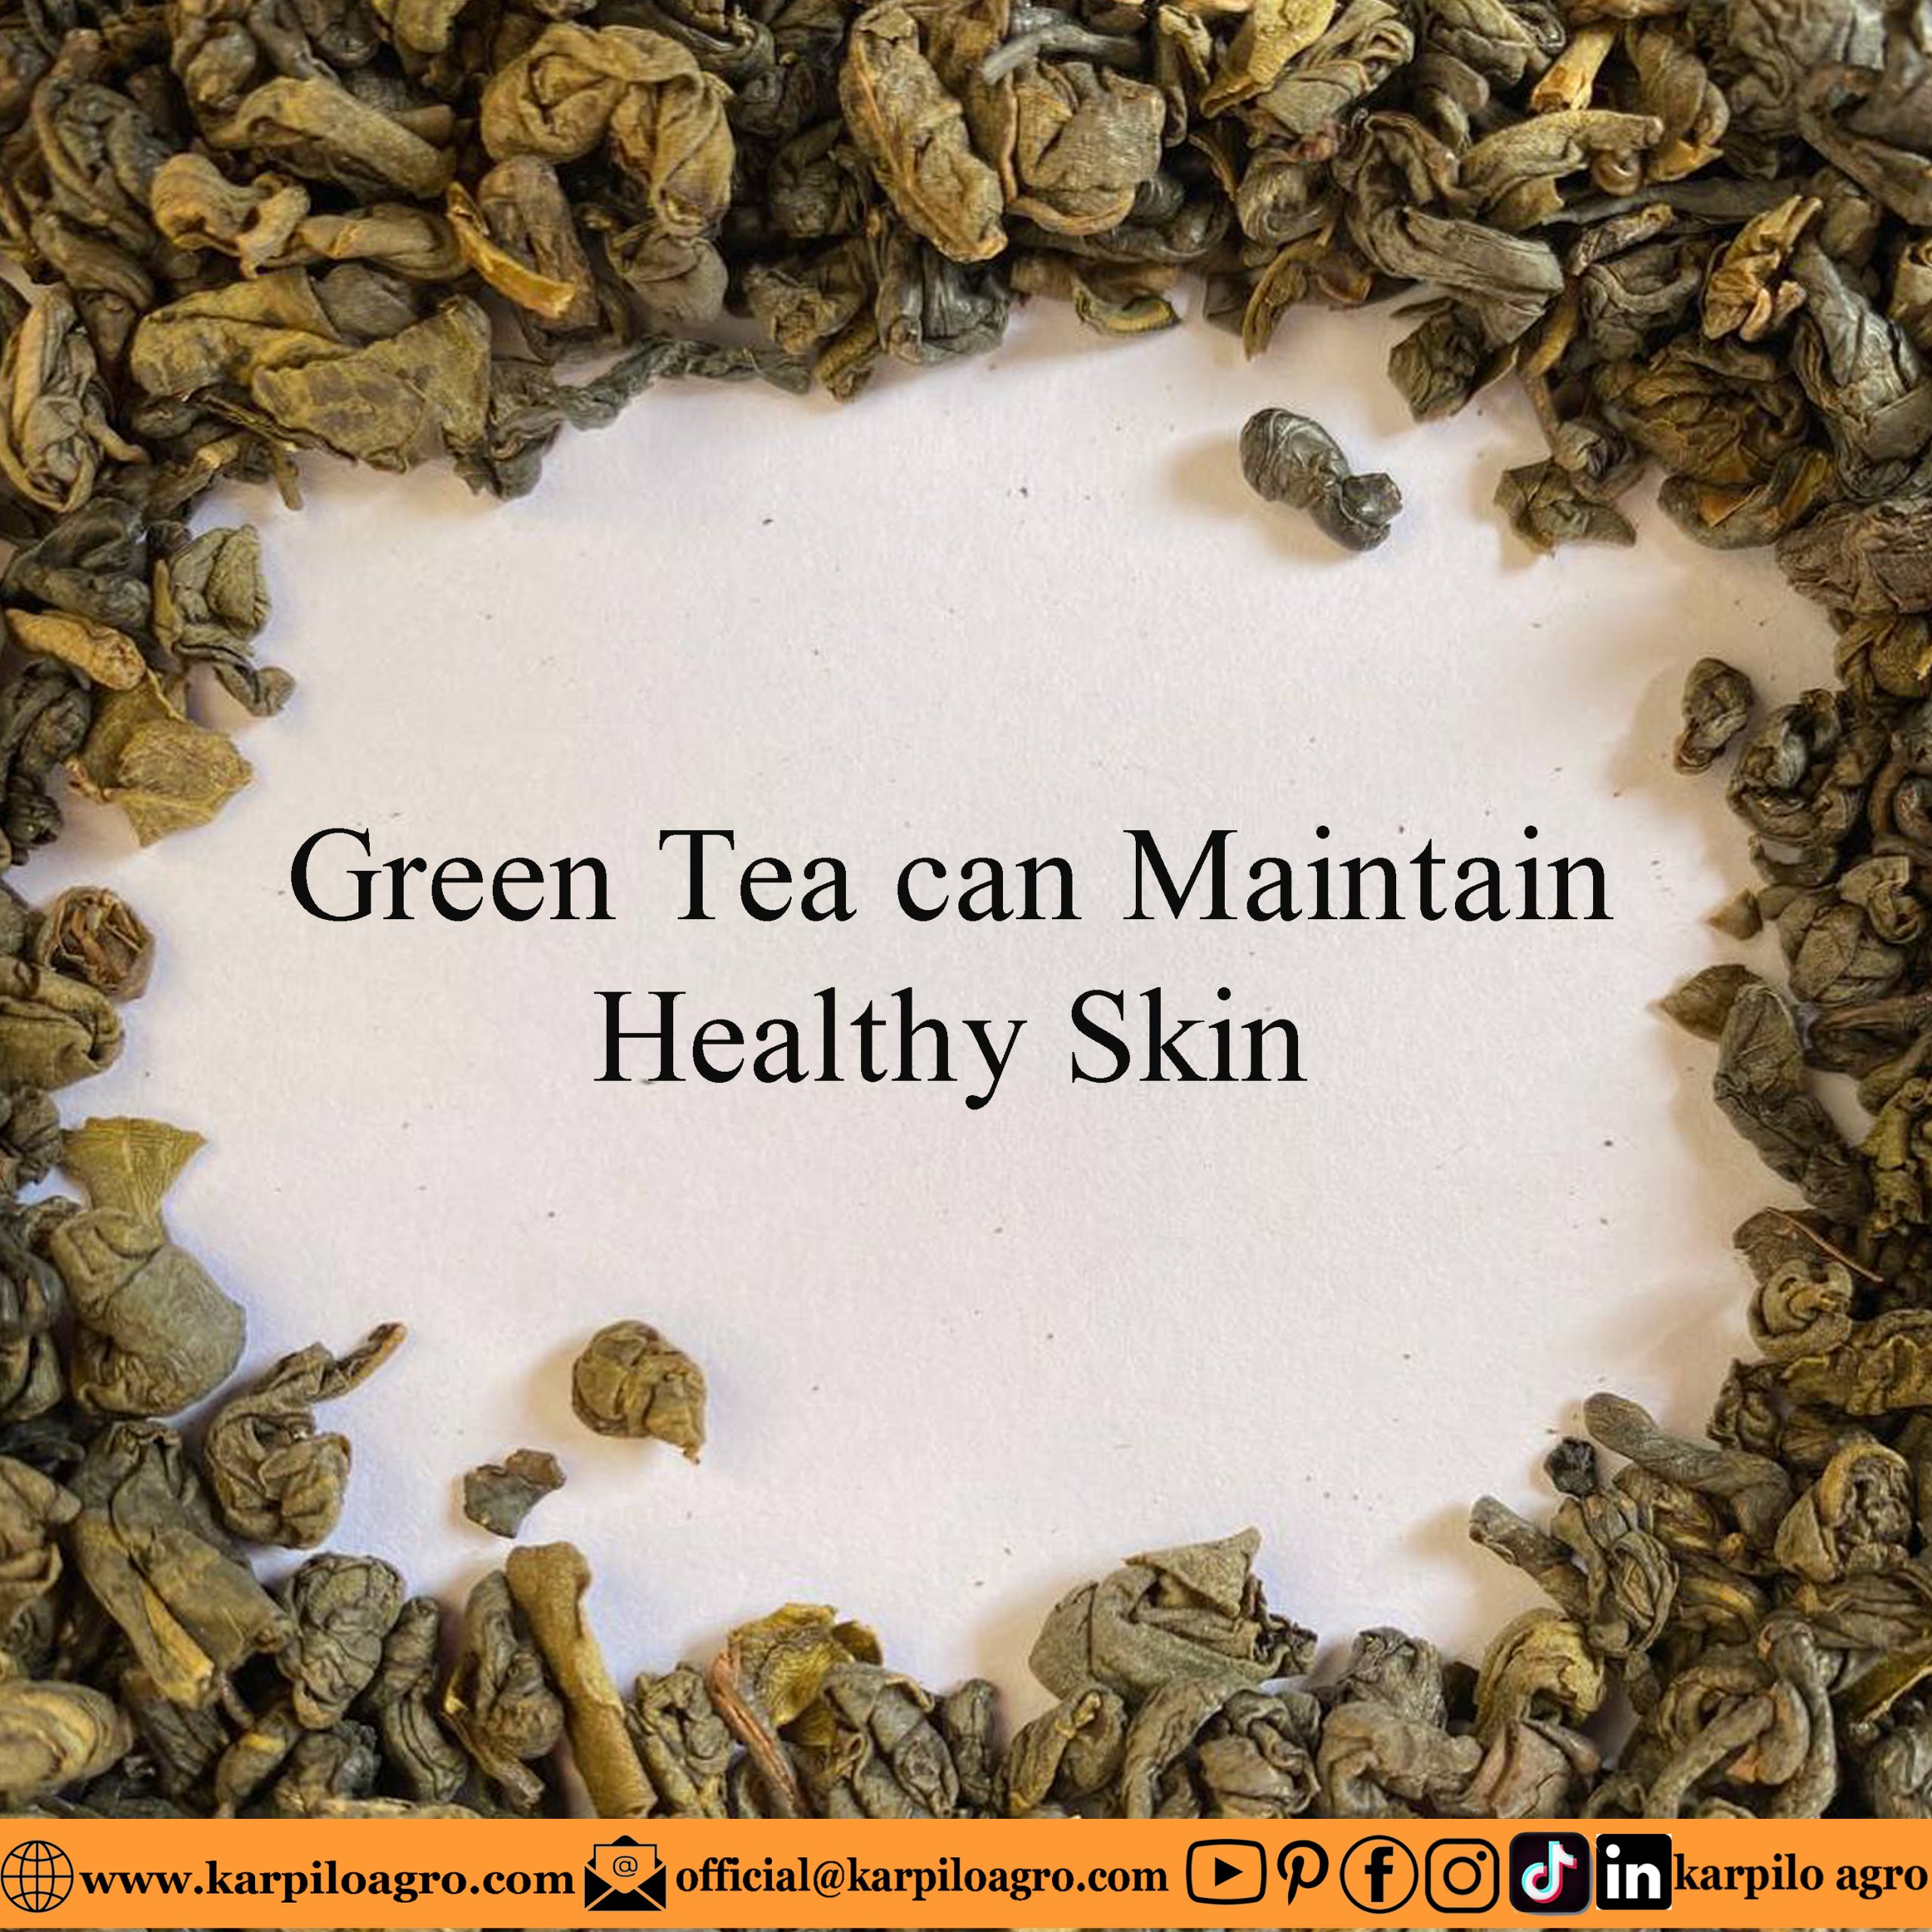 The various kinds of ingredients found in tea are very beneficial for maintaining a healthy body and skin. The content of epigallocatechin gallate in green tea can function to protect the skin from ultra violet rays, which can damage the skin, so consuming green tea can protect the skin from free radicals. There are even studies that say that consuming green tea can inhibit the growth of cancer cells, including skin cancer. Many skin care products use green tea extract so that it can hydrate the skin and make it softer. In addition, Vitamin C contained in green tea can increase collagen which can maintain skin elasticity and antioxidants which can also prevent premature aging of the skin. In addition, drinking or applying green tea extract to skin with acne can help relieve acne because the polyphenol content in green tea can reduce oil production on the face which triggers acne. Not only consumed, cooled green tea bags can also be used as a natural skin cooler which of course can make the skin fresh, relieve pain and redness of the skin caused by sunburn. The anti-inflammatory properties found in green tea can help cool the skin so that it can prevent skin damage from the sun. Apart from that, cold green tea bags can also be used to compress swollen eyes due to lack of sleep or lack of rest which causes eye bags to appear.